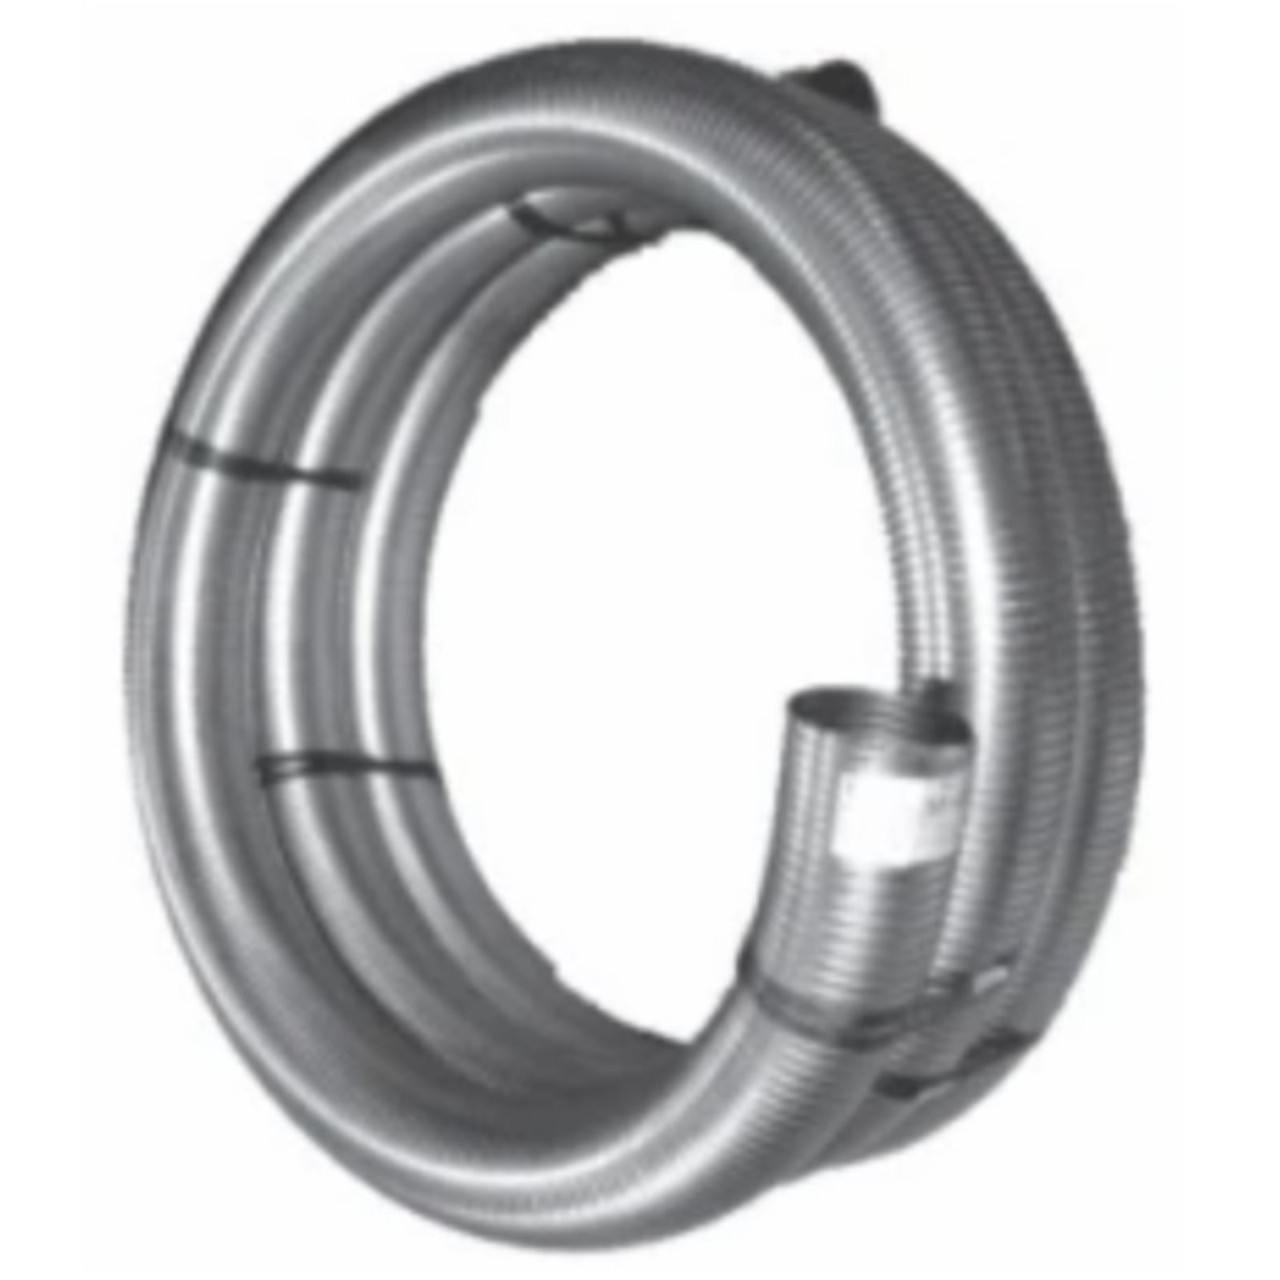 3 x 120 304 Stainless Steel Flex Exhaust Hose SF-3120